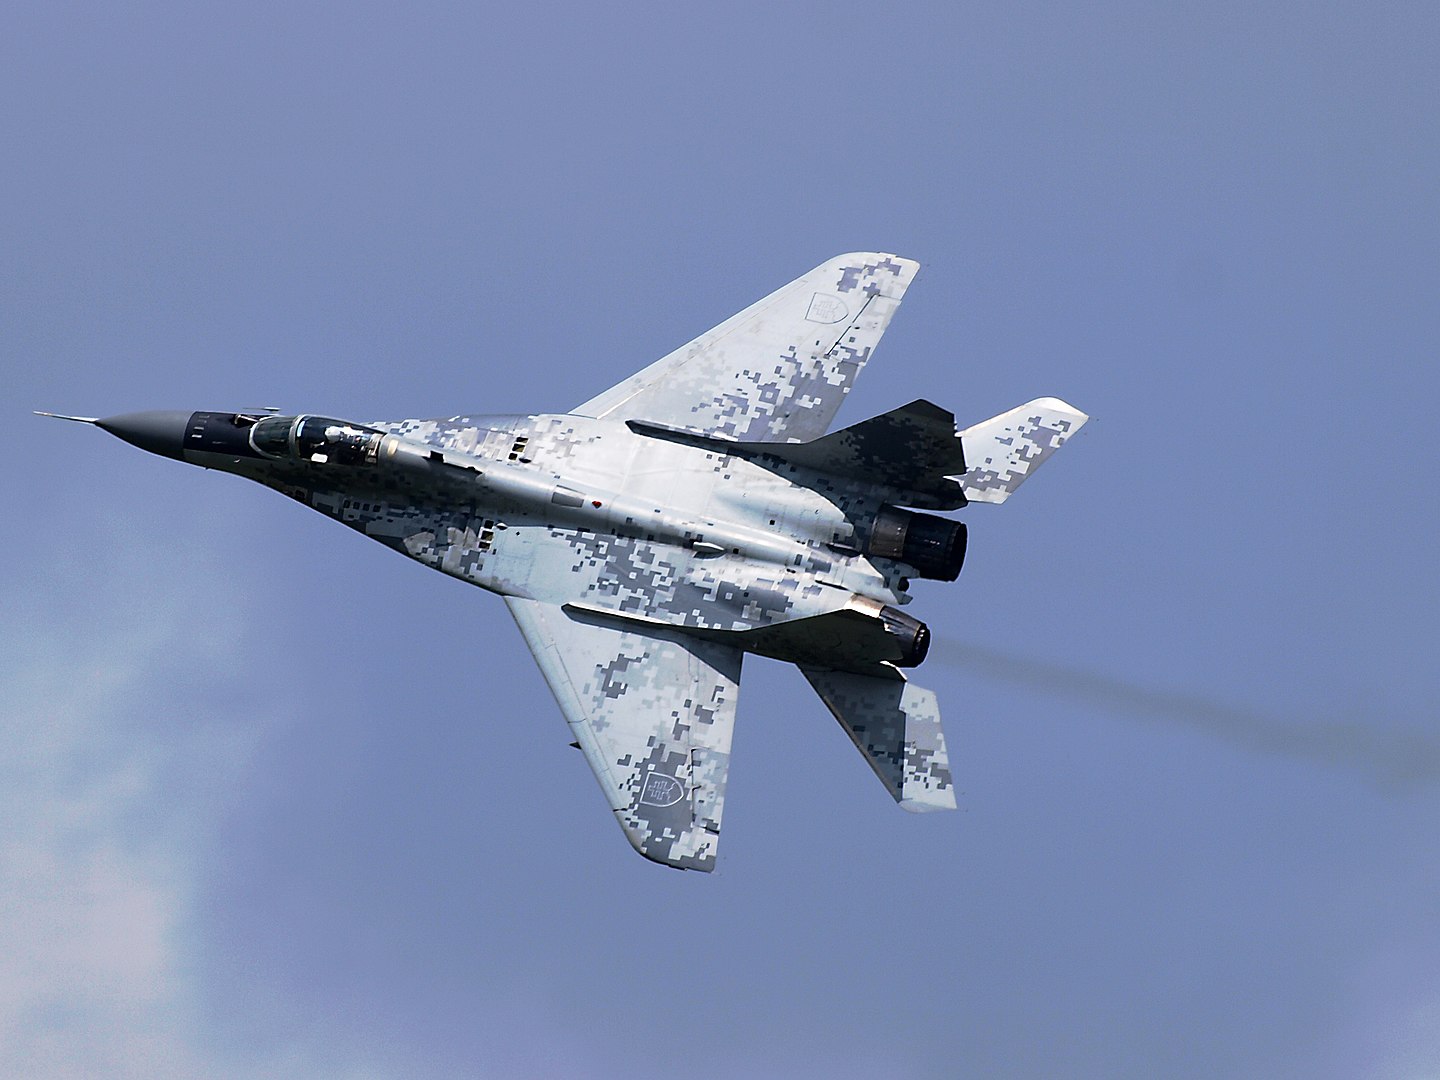 Secret Is Out: Why America Bought 21 Russian MiG-29 Fighters | The .